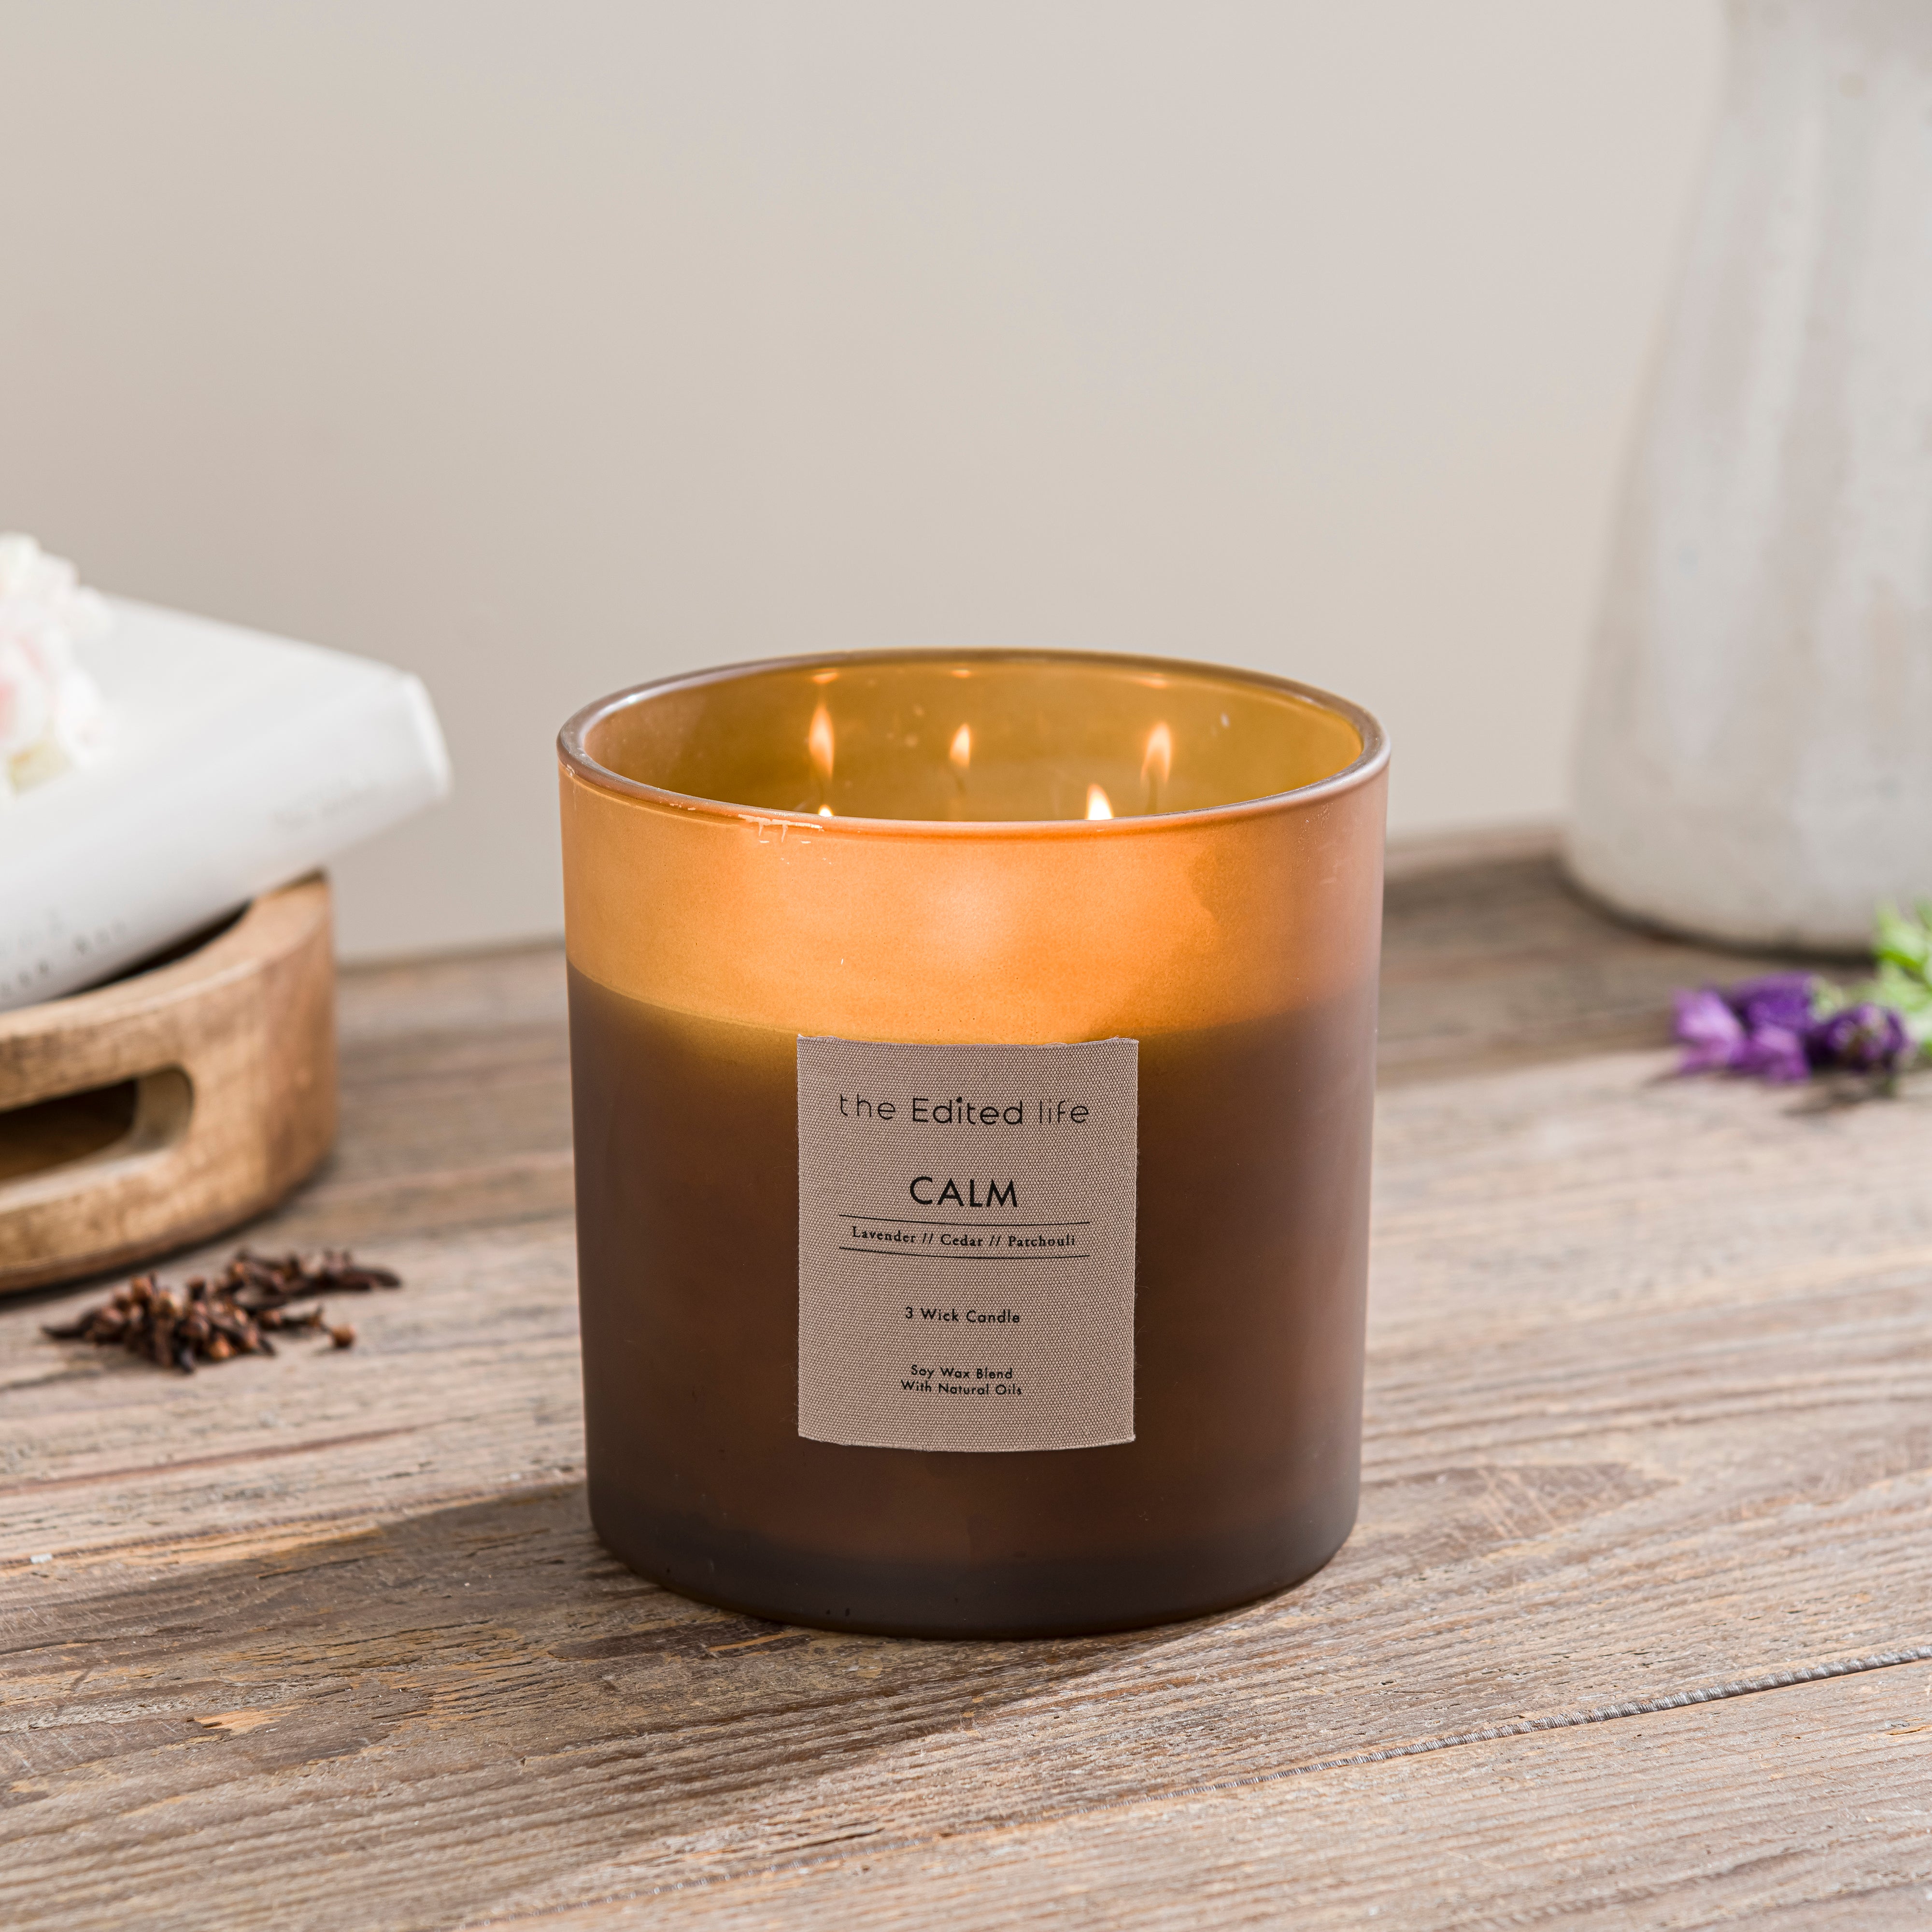 Calm Soy Wax Multi Wick Candle